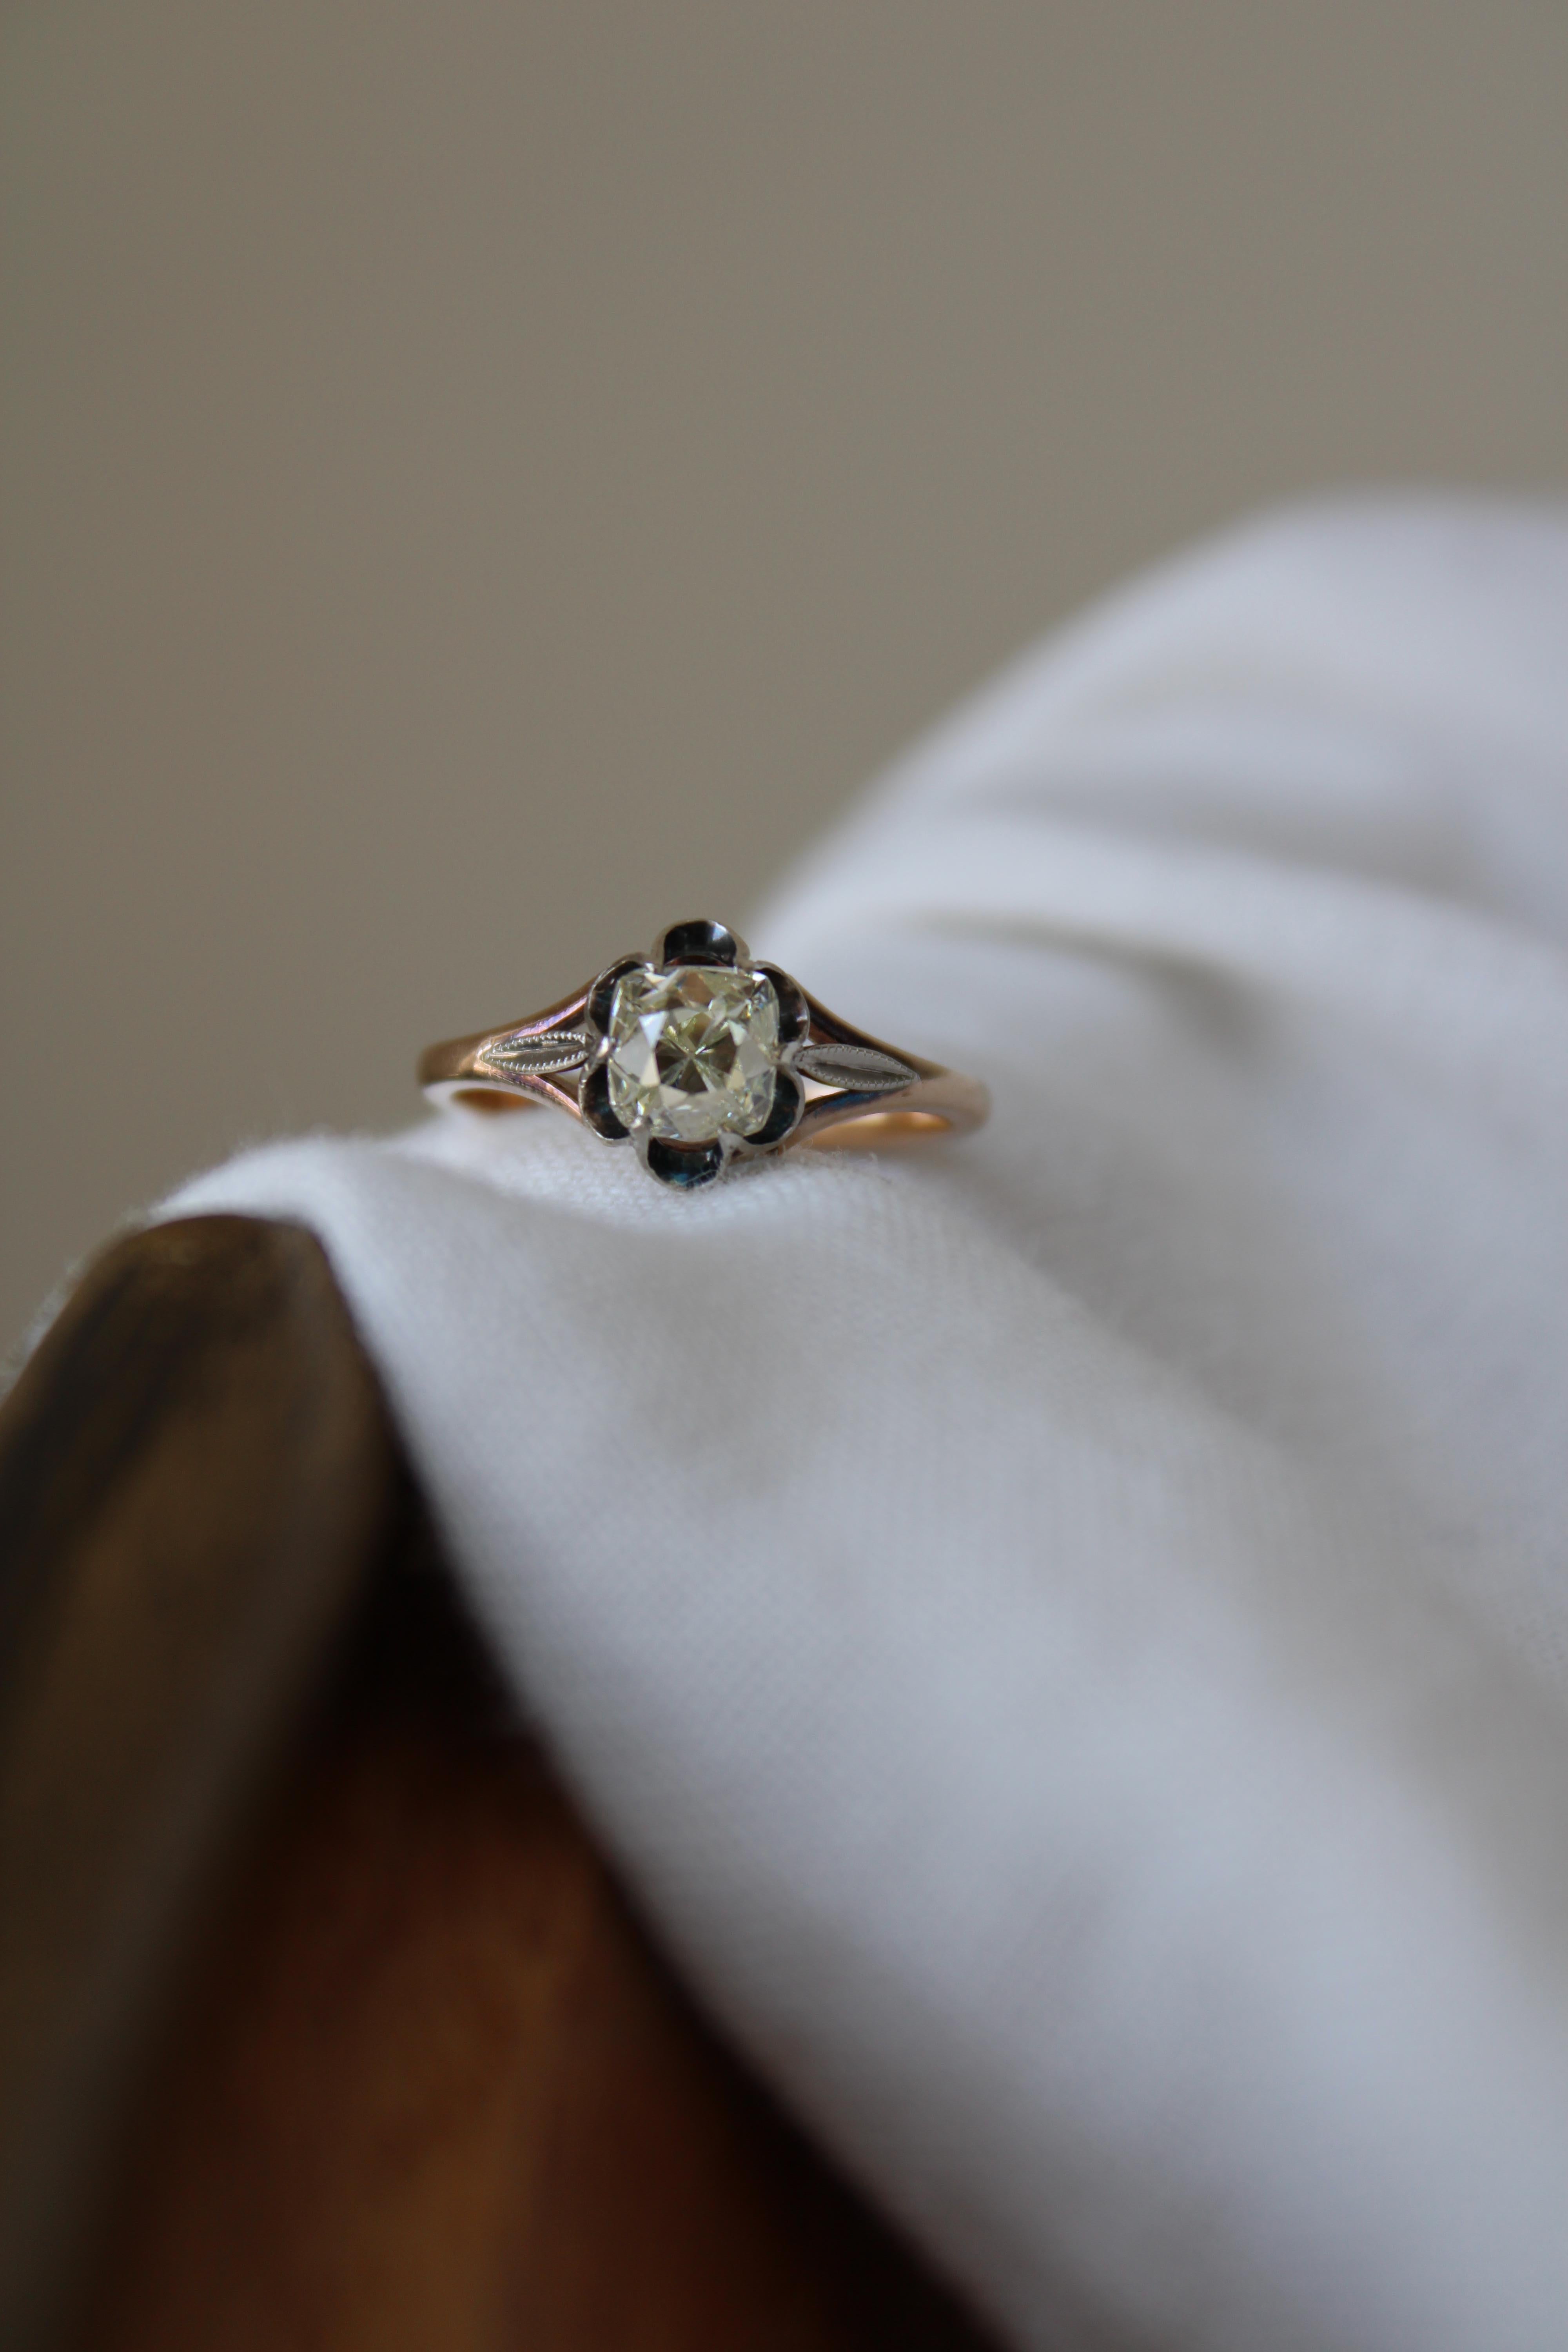 This is one incredible ring. 
It finds its origins in Soviet Russia, centered with a 1700s certified Peruzzi Cut diamond, set a bit later in its life within a two-tone Victorian Setting.

A little more about the stone. A Peruzzi cut diamond is a